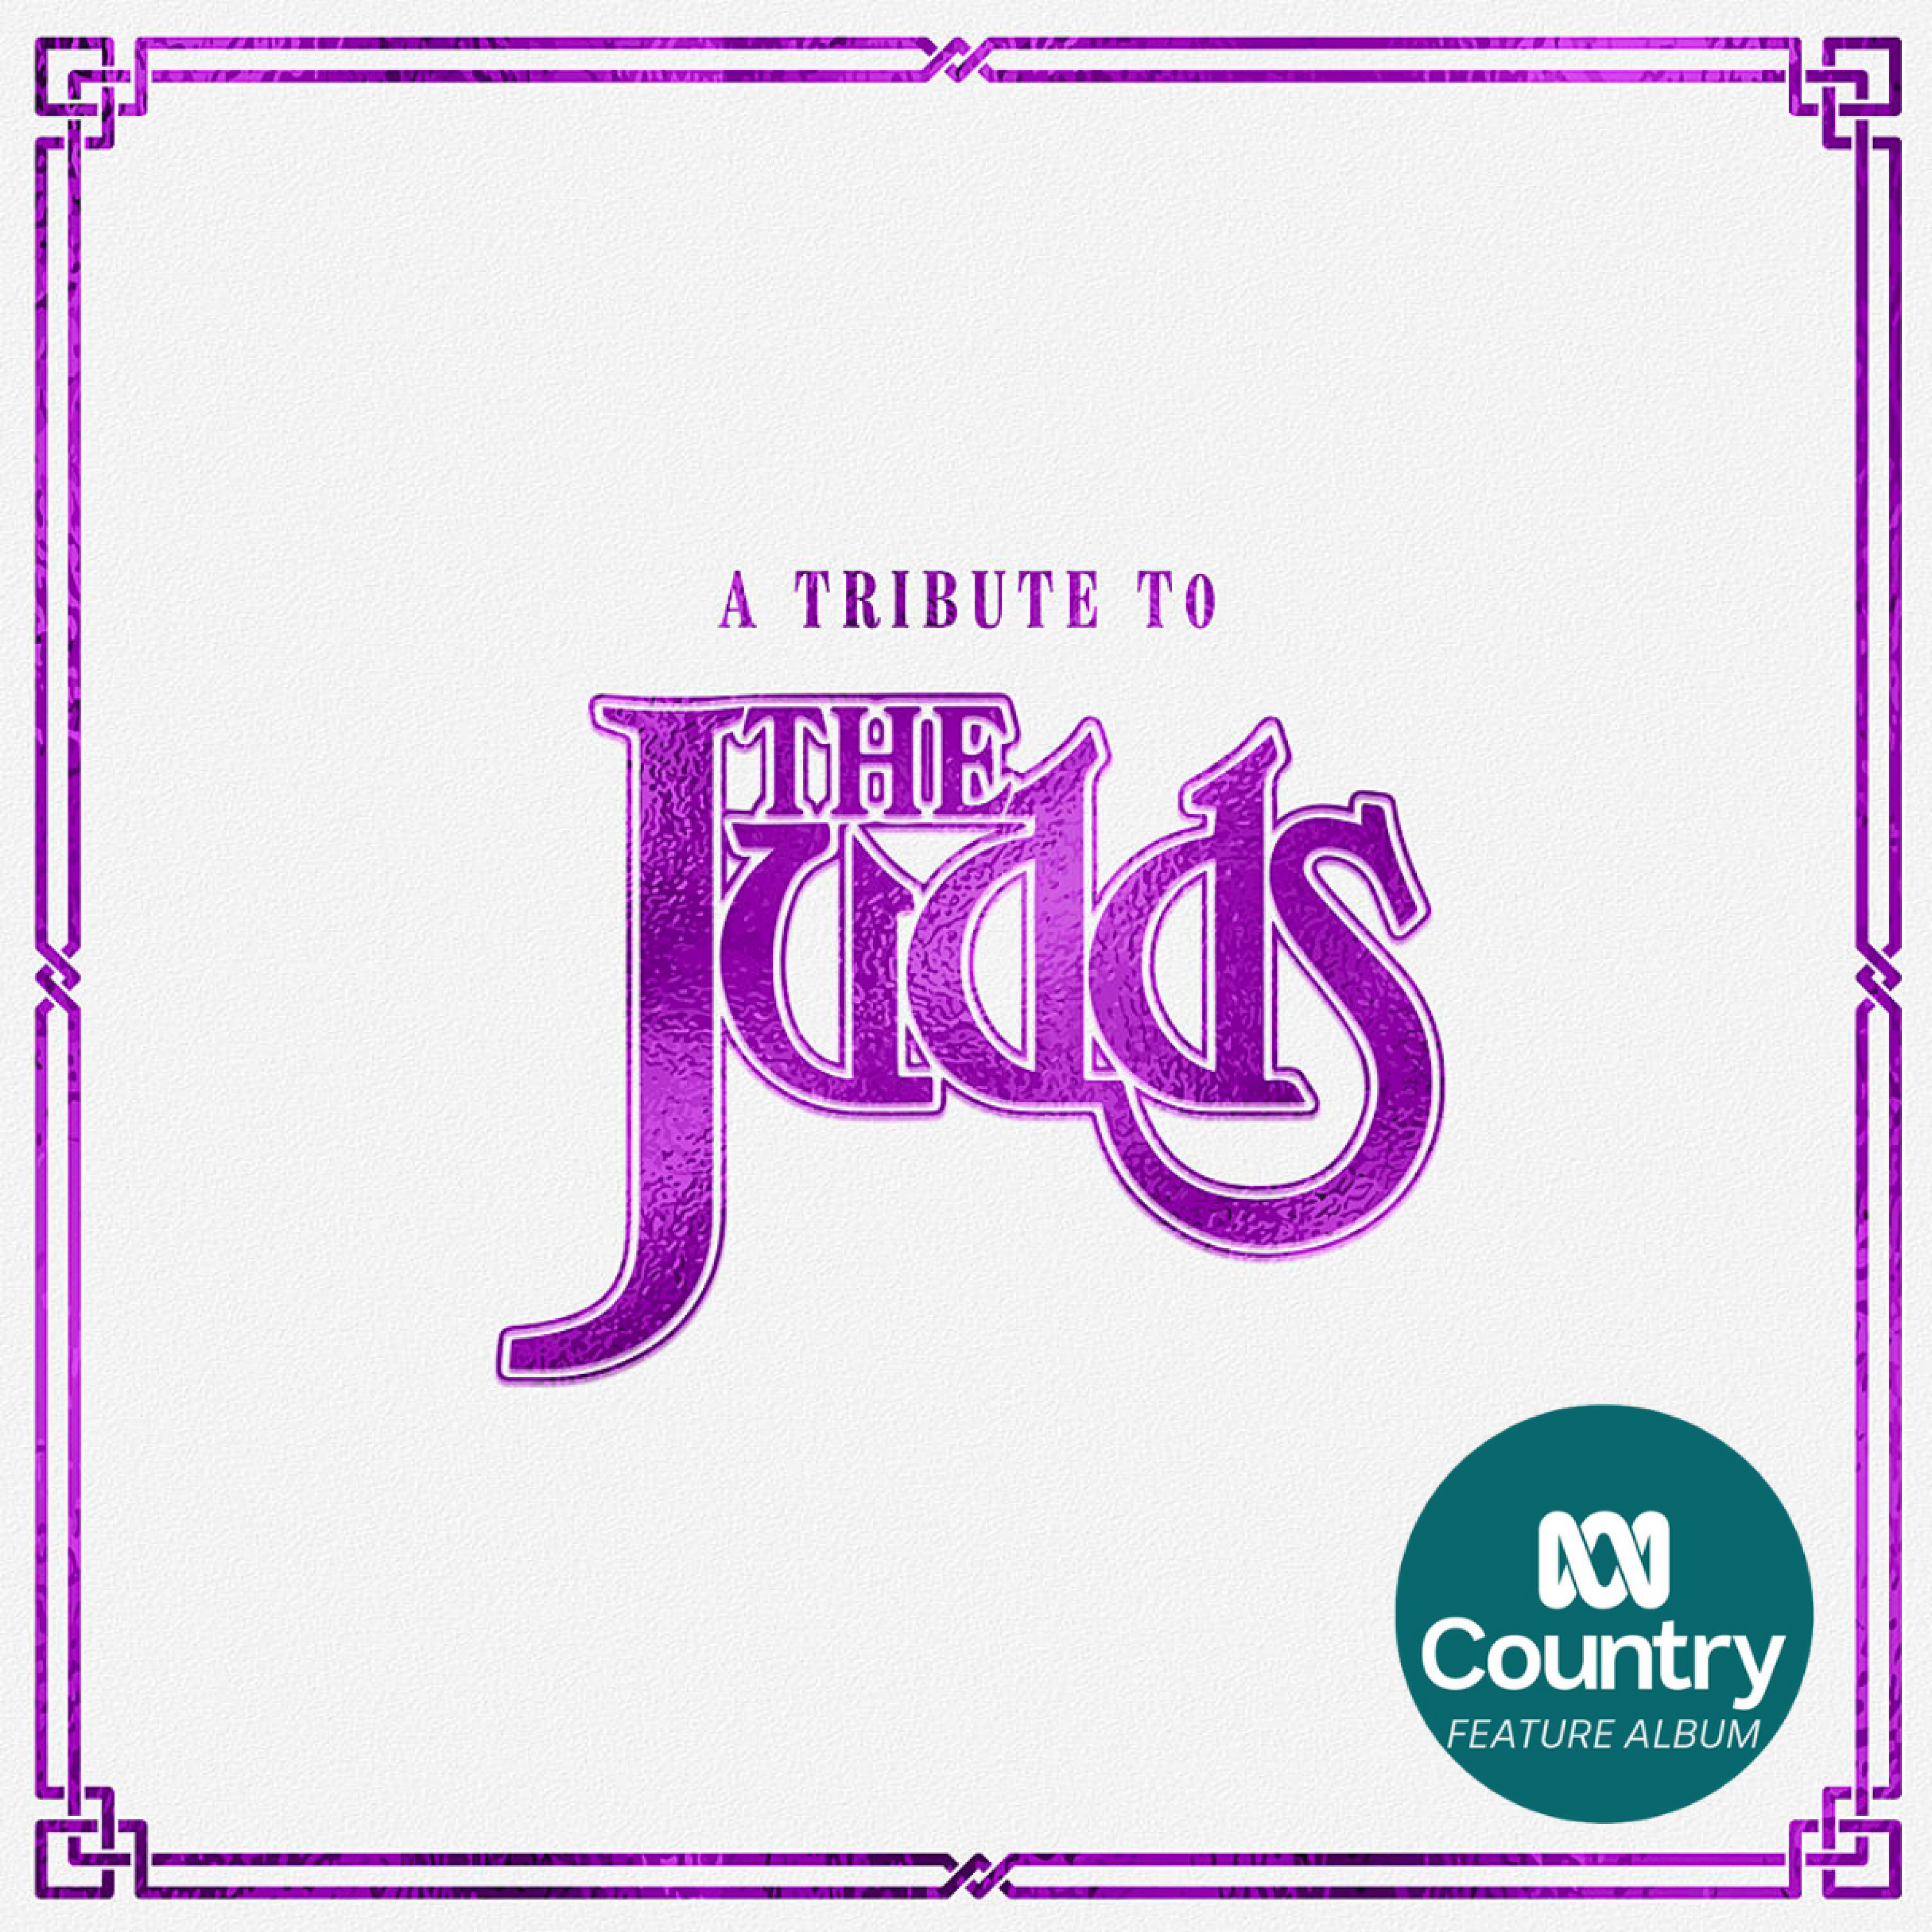 A Tribute To The Judds - 'Feature Album Of The Week' on ABC Country 